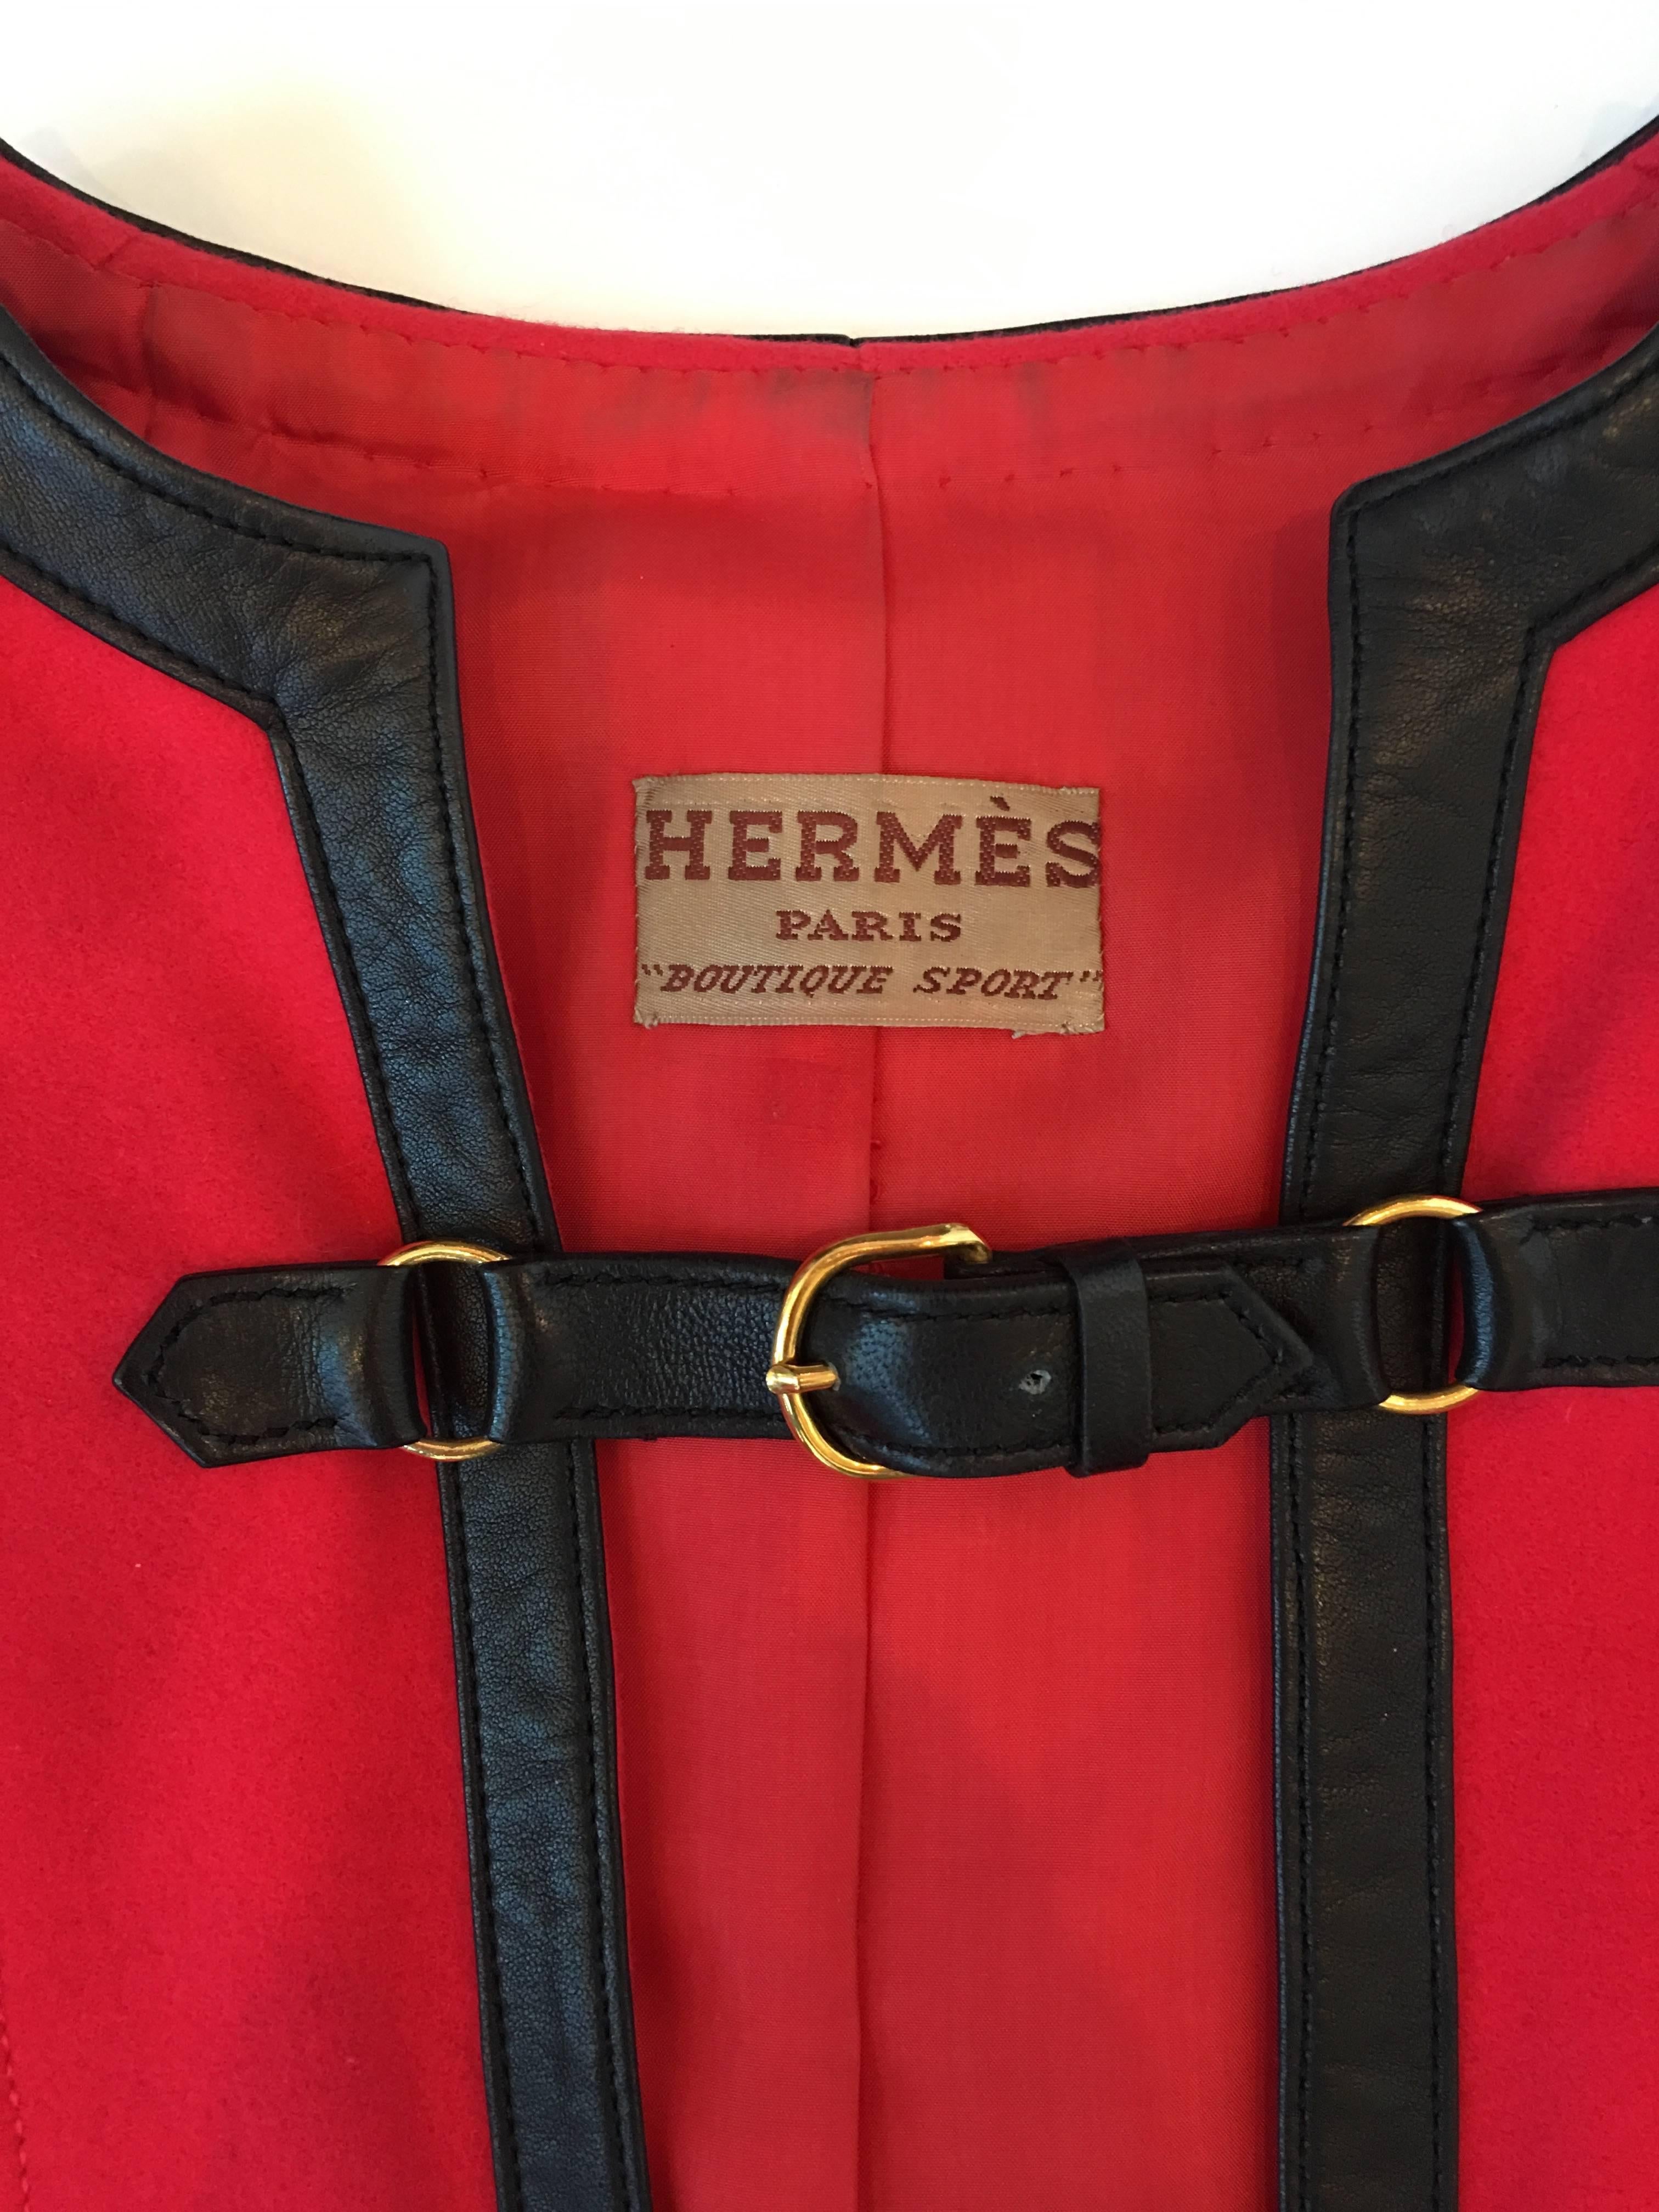 Hermes 1970's Crimson Red Tunic Top with Black Leather Strapping For Sale 1